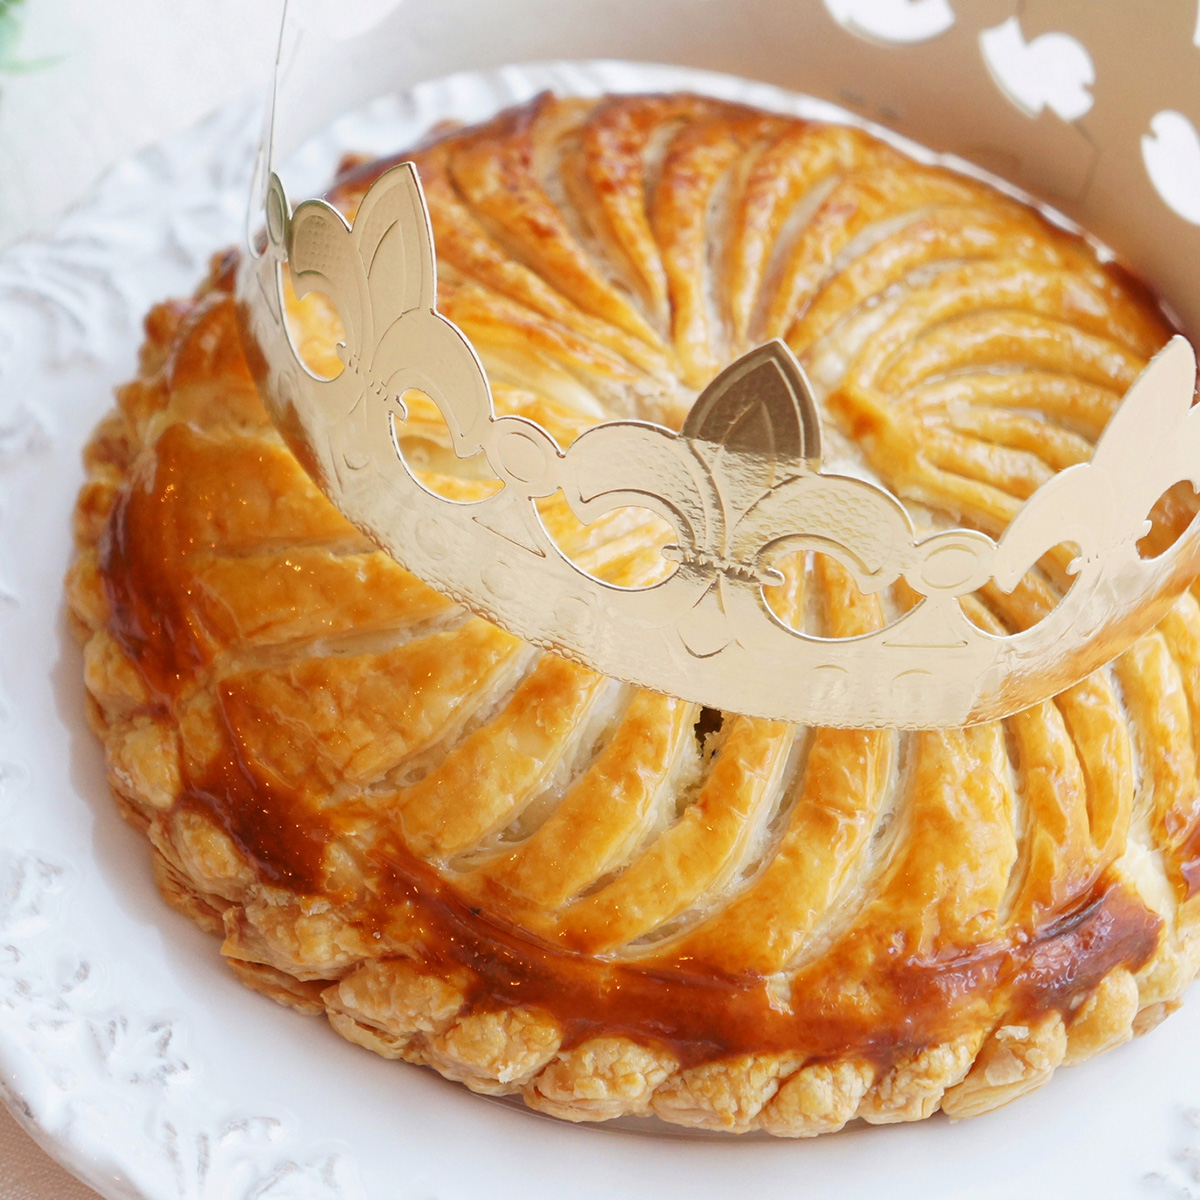 Galette des Rois (French Kings' Cake)